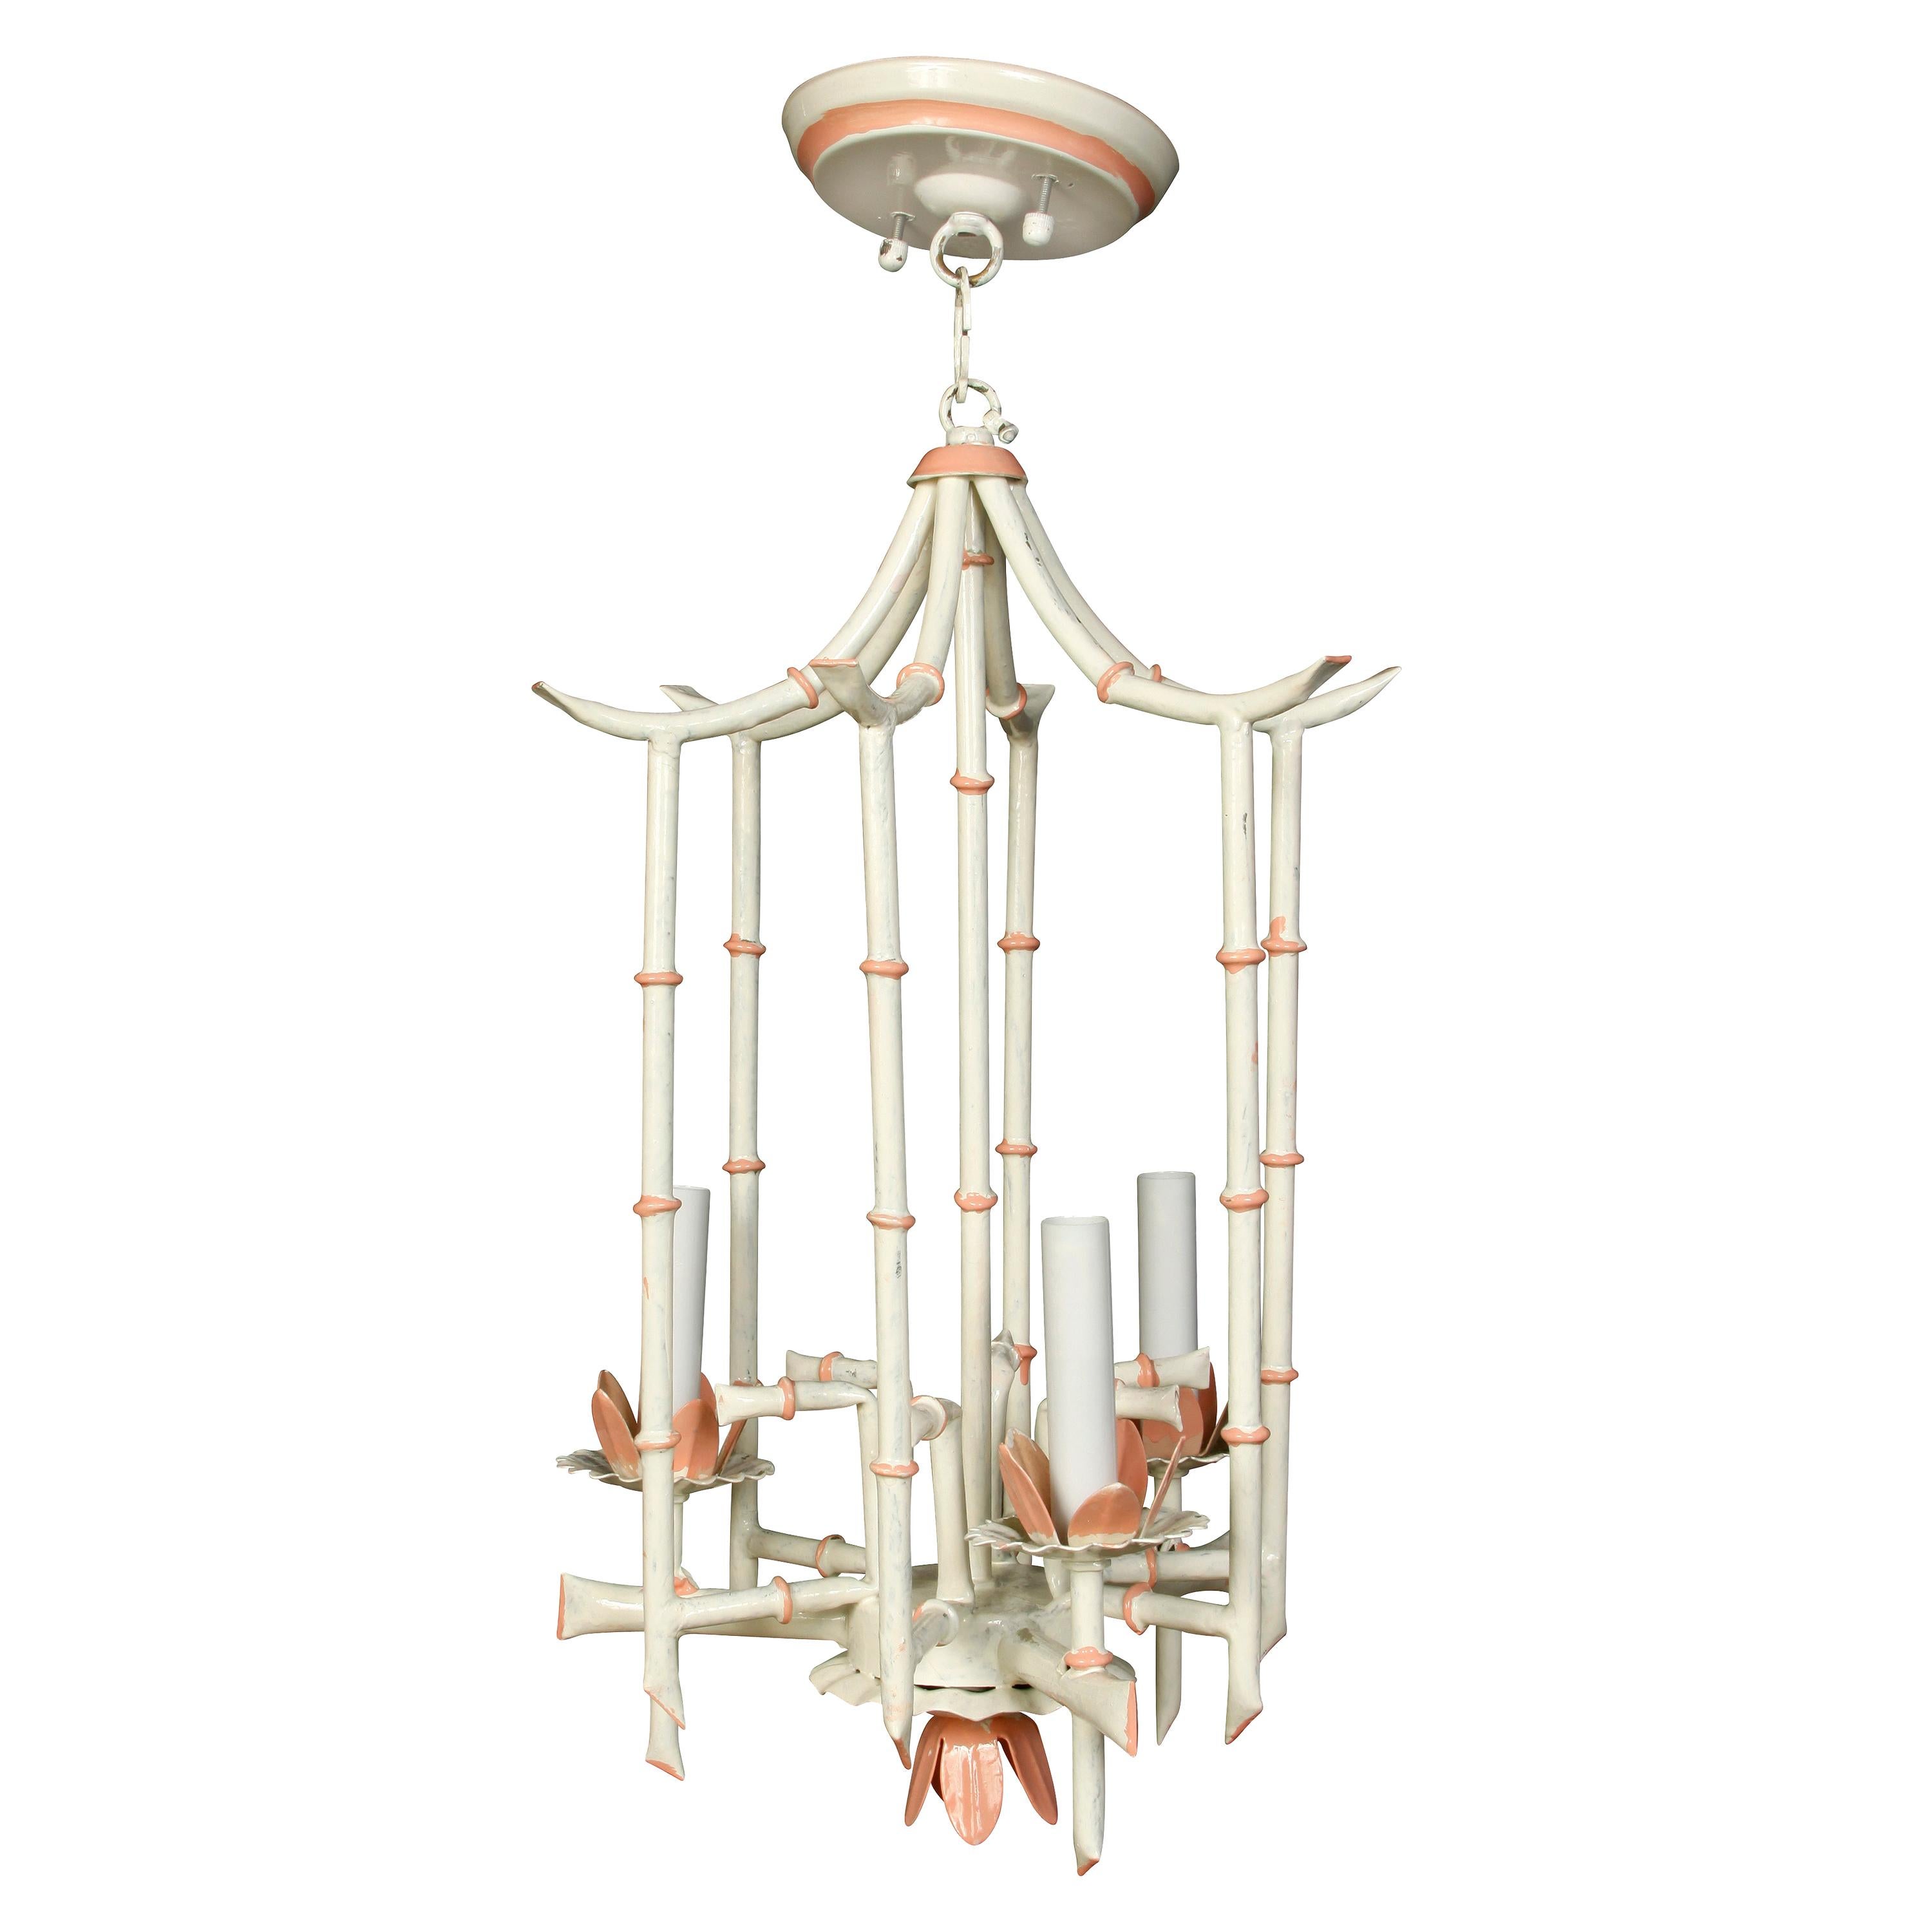 Vintage Painted Faux Bamboo Chandelier Lantern